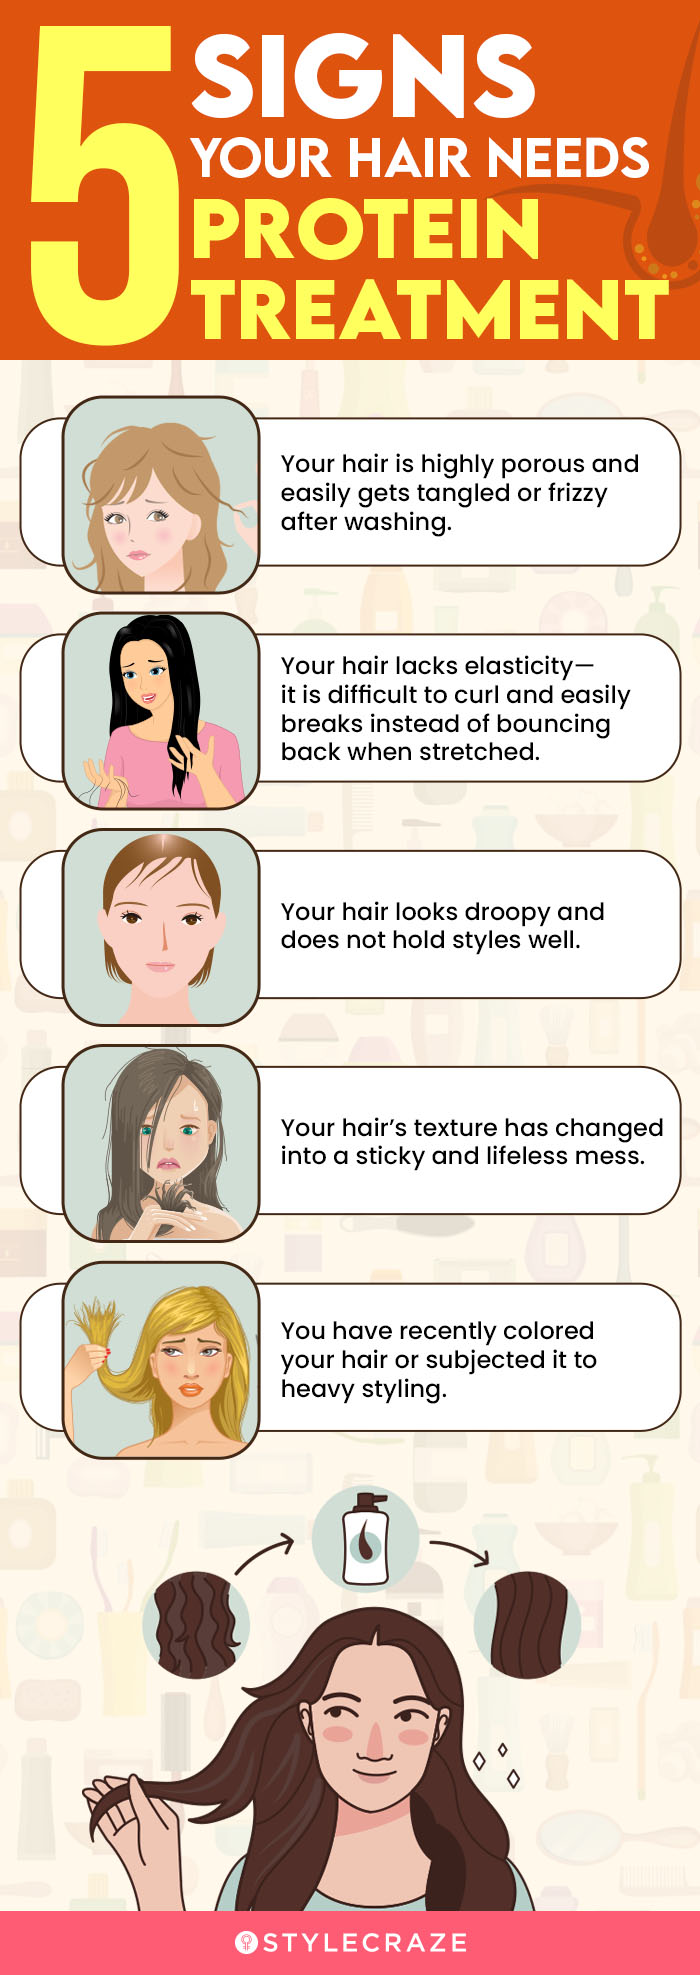 5 signs your hair needs protein treatment (infographic)